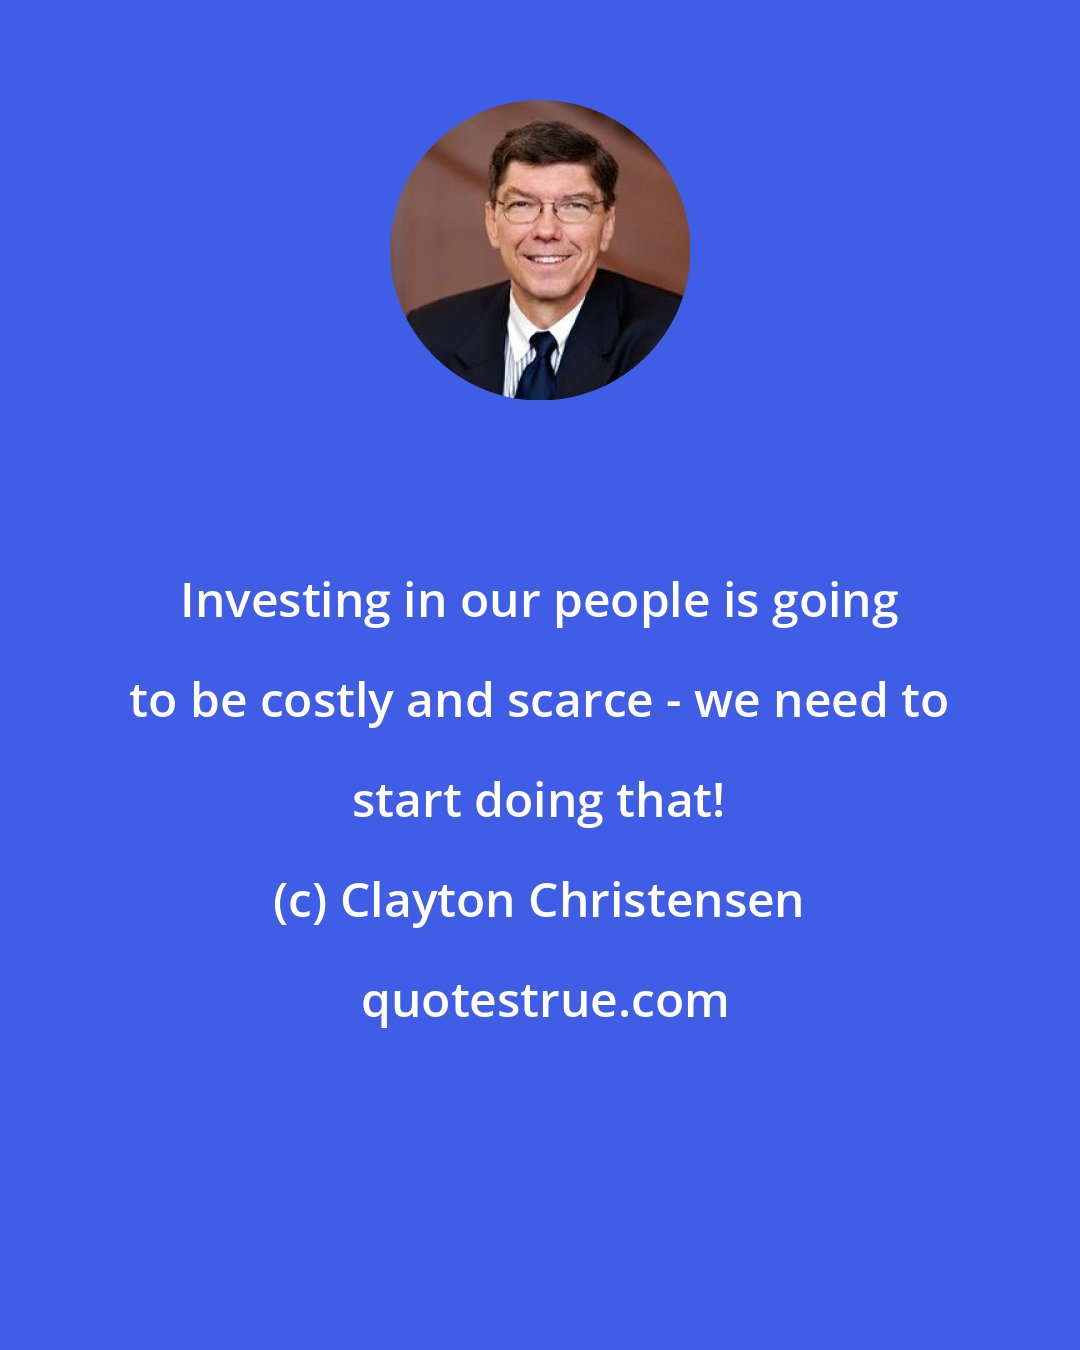 Clayton Christensen: Investing in our people is going to be costly and scarce - we need to start doing that!